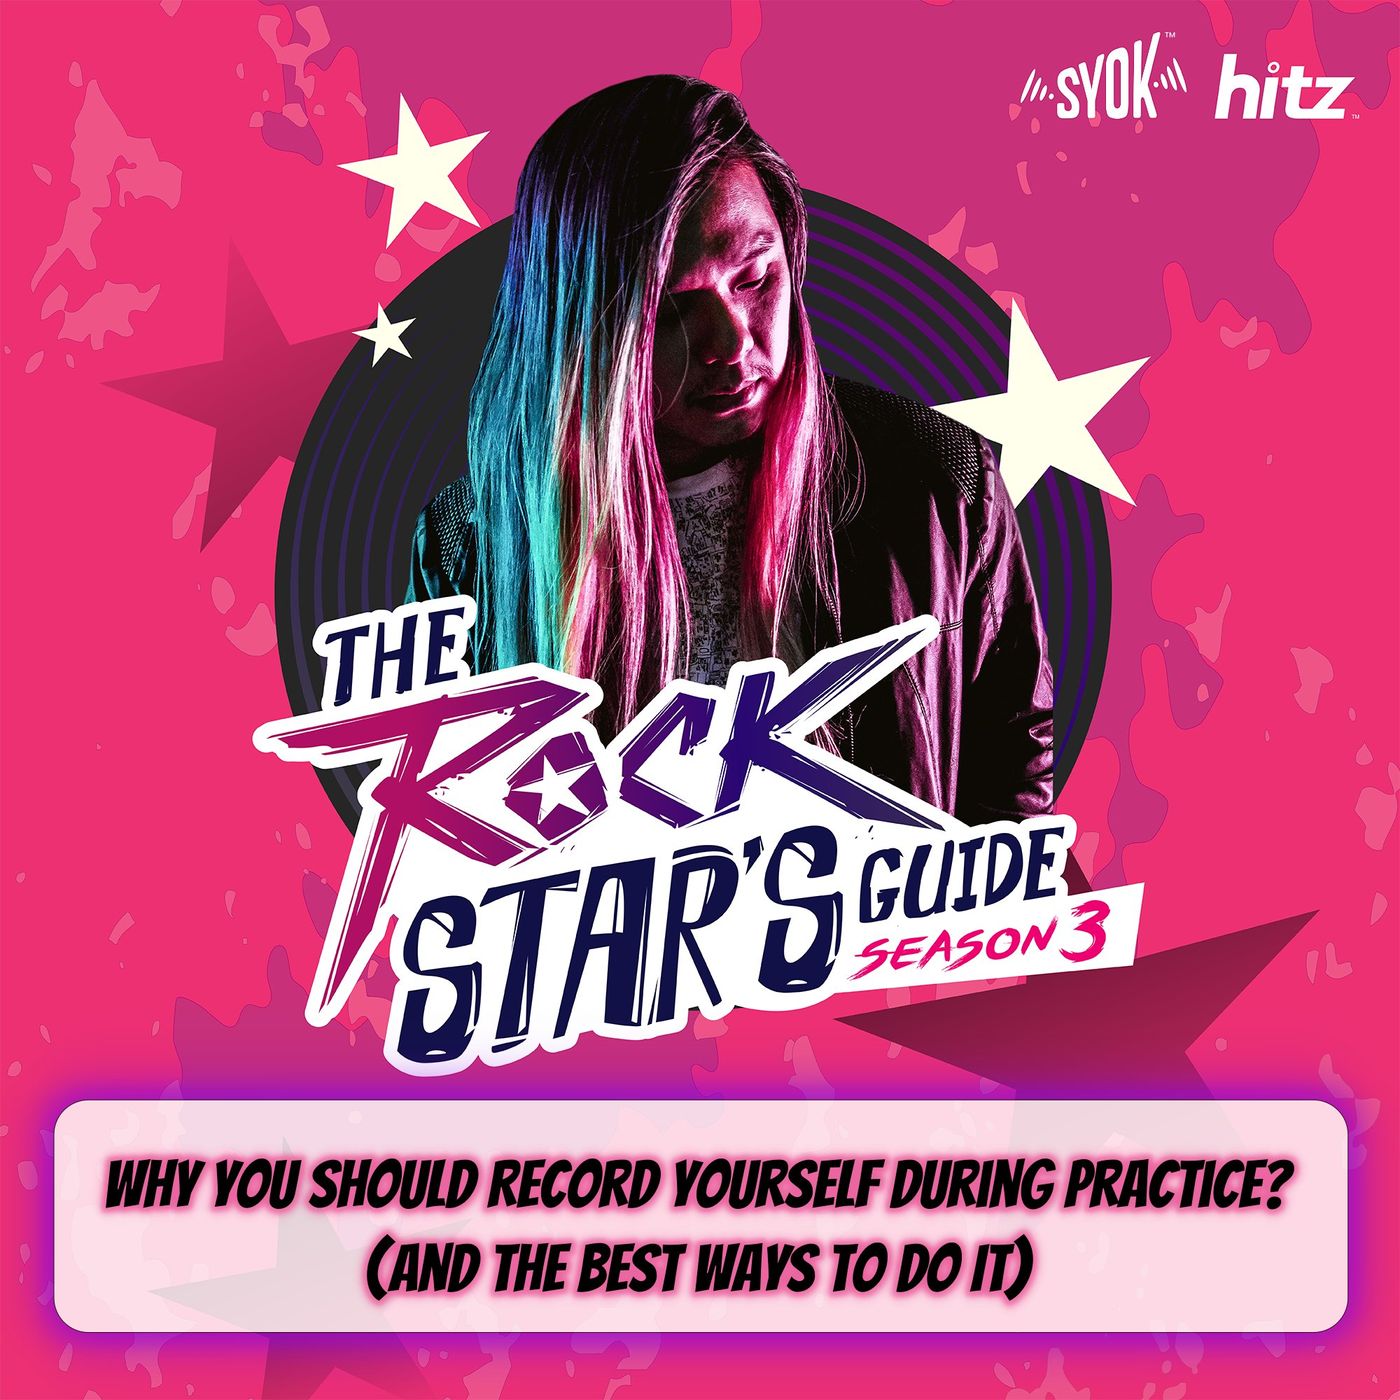 Why You Should Record Yourself During Practice (And the Best Ways to Do It) | The Rockstar's Guide S3E13